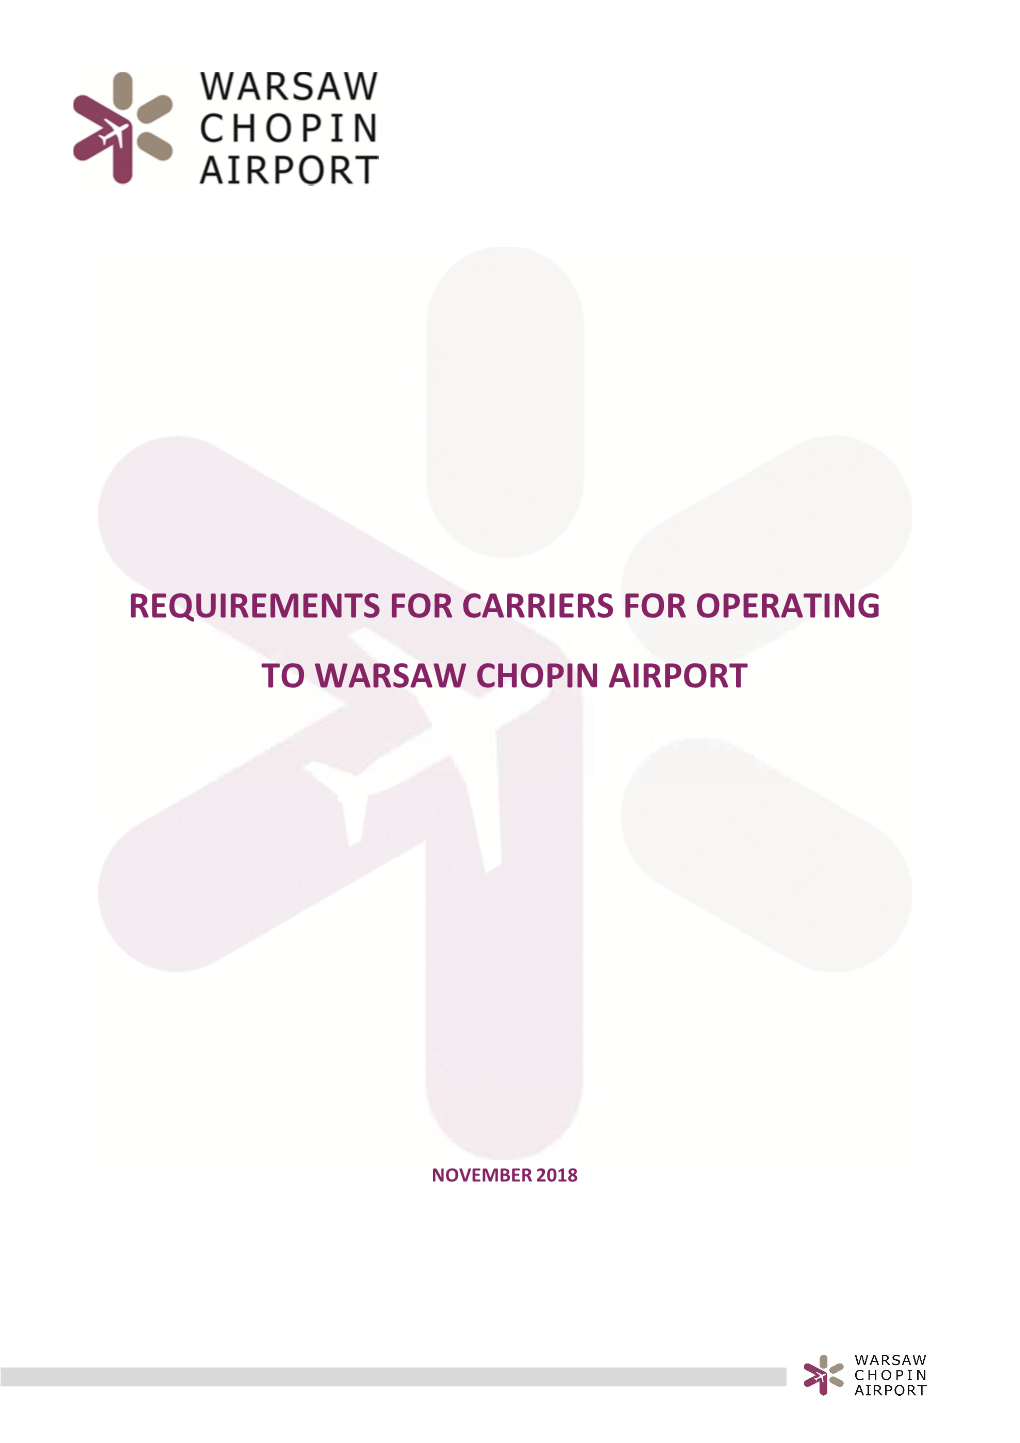 Requirements for Carriers for Operating to Warsaw Chopin Airport